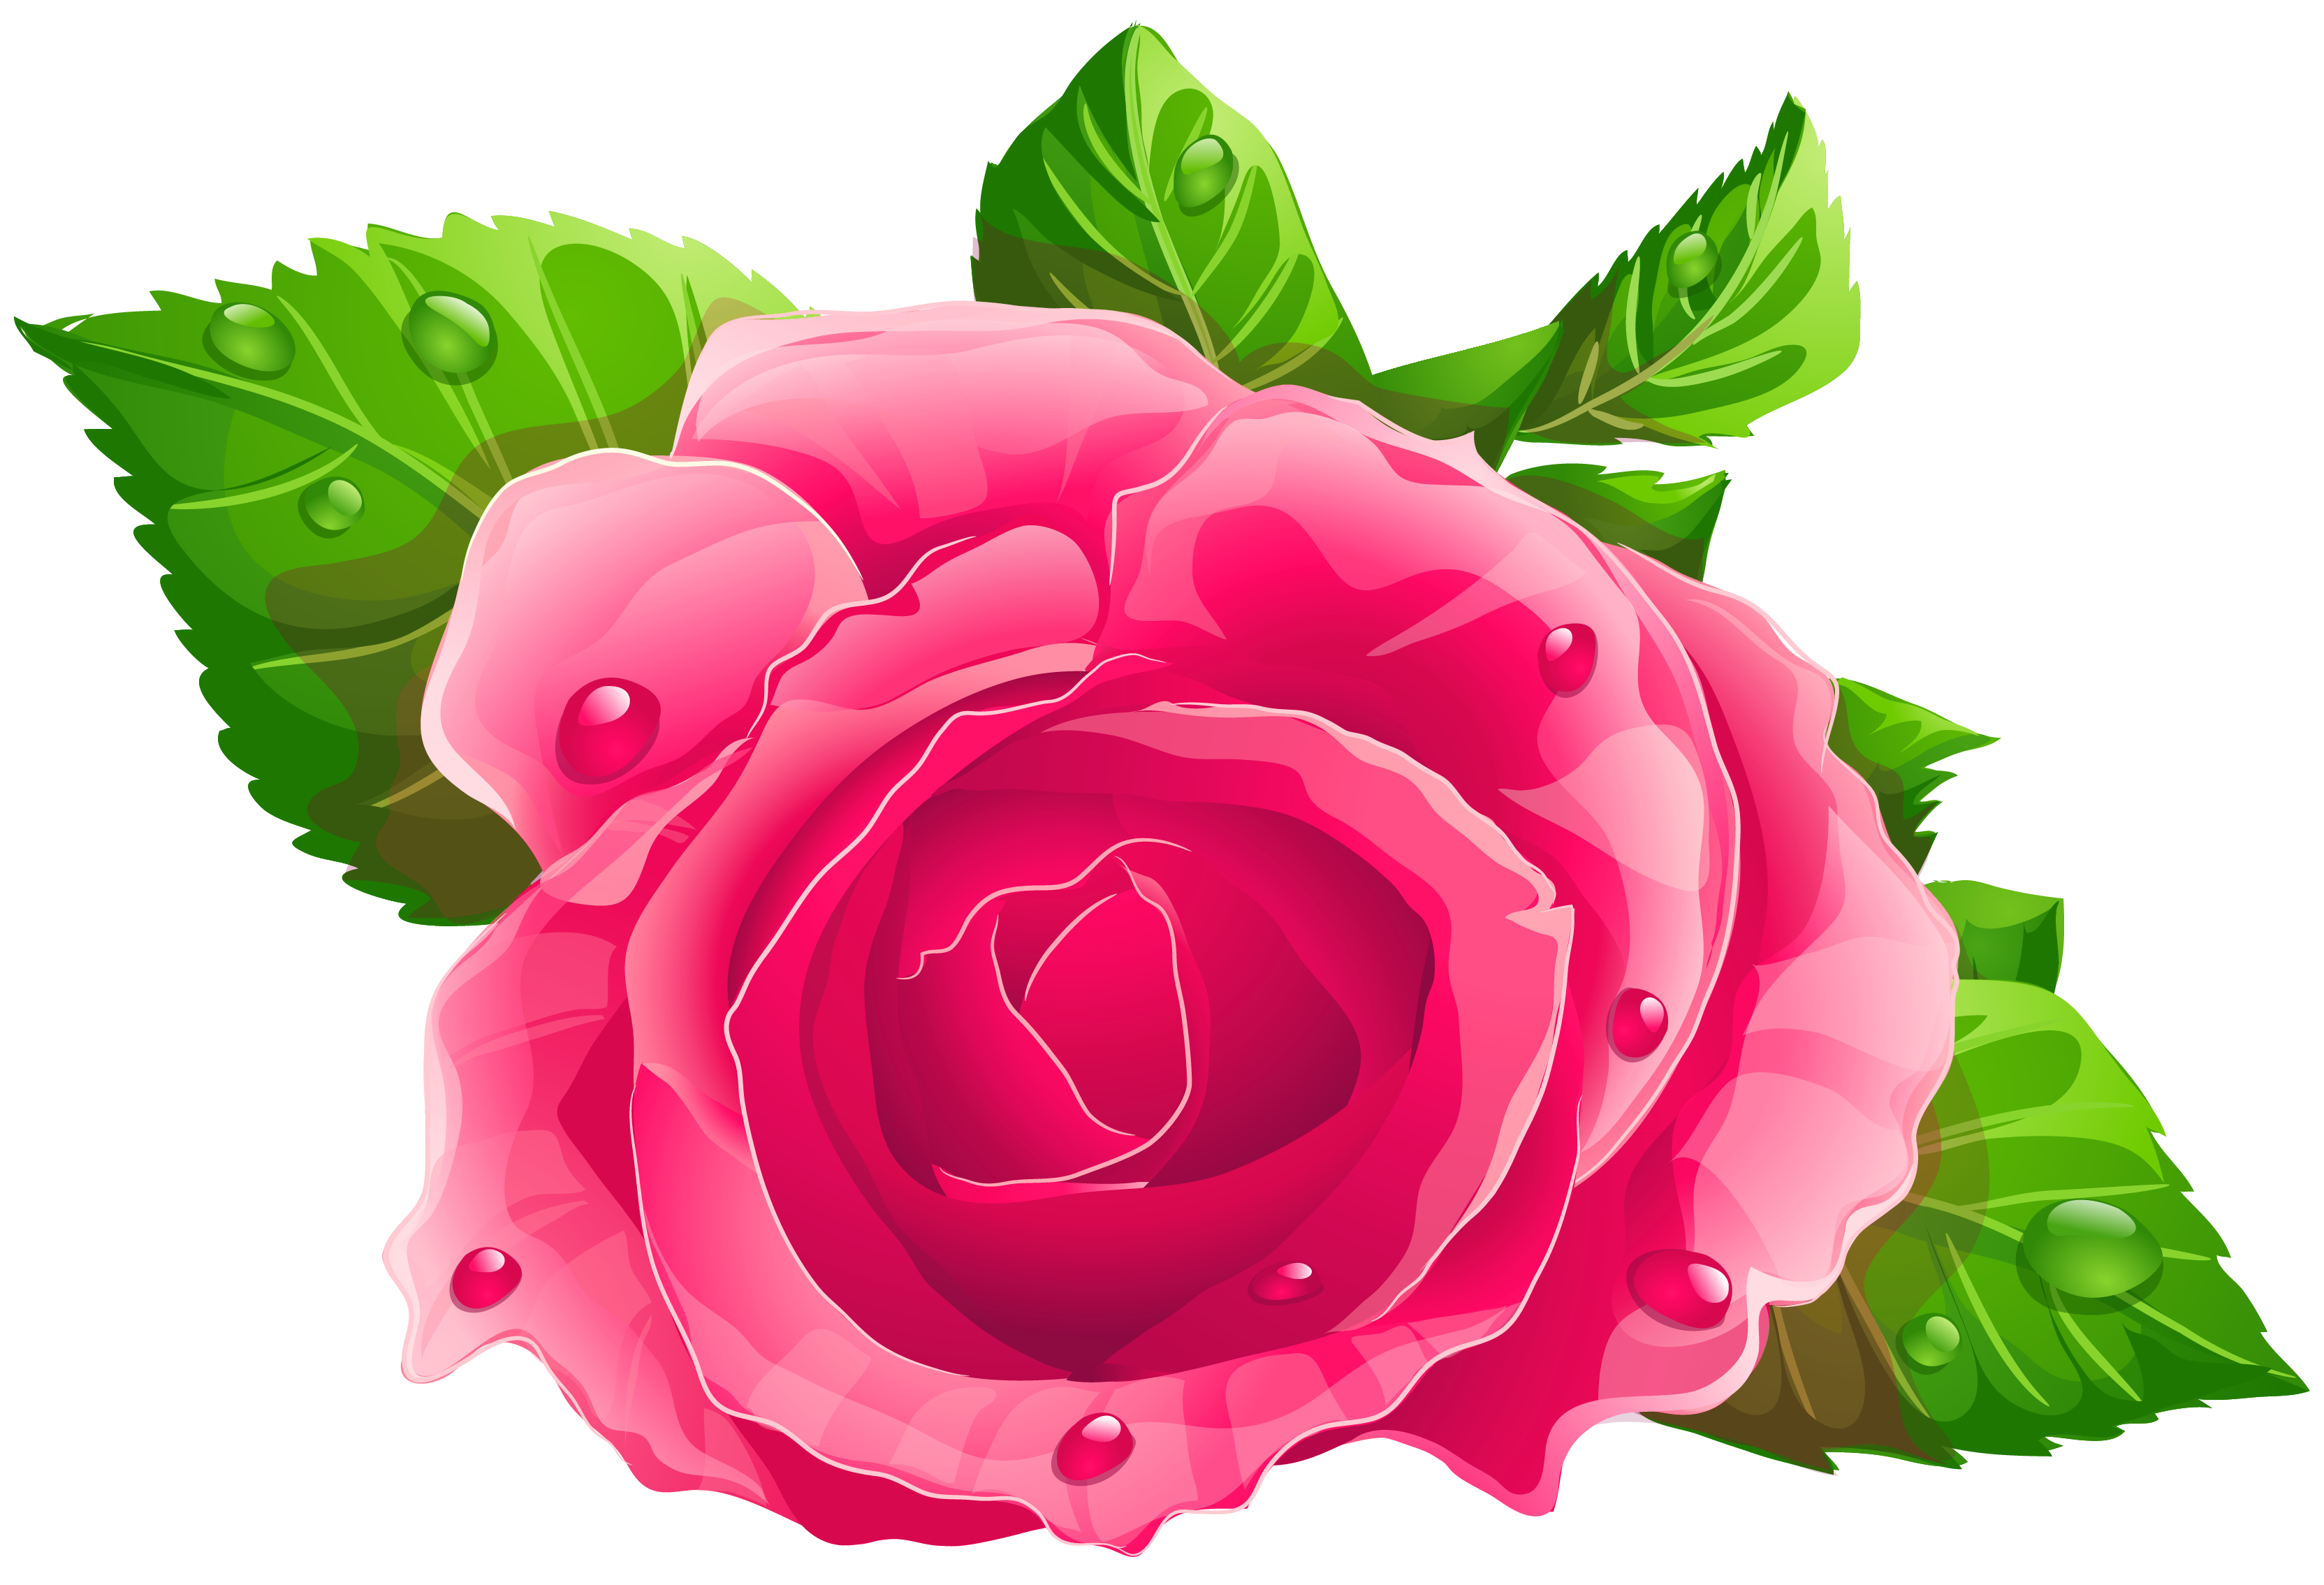 Large Pink Rose Clipart